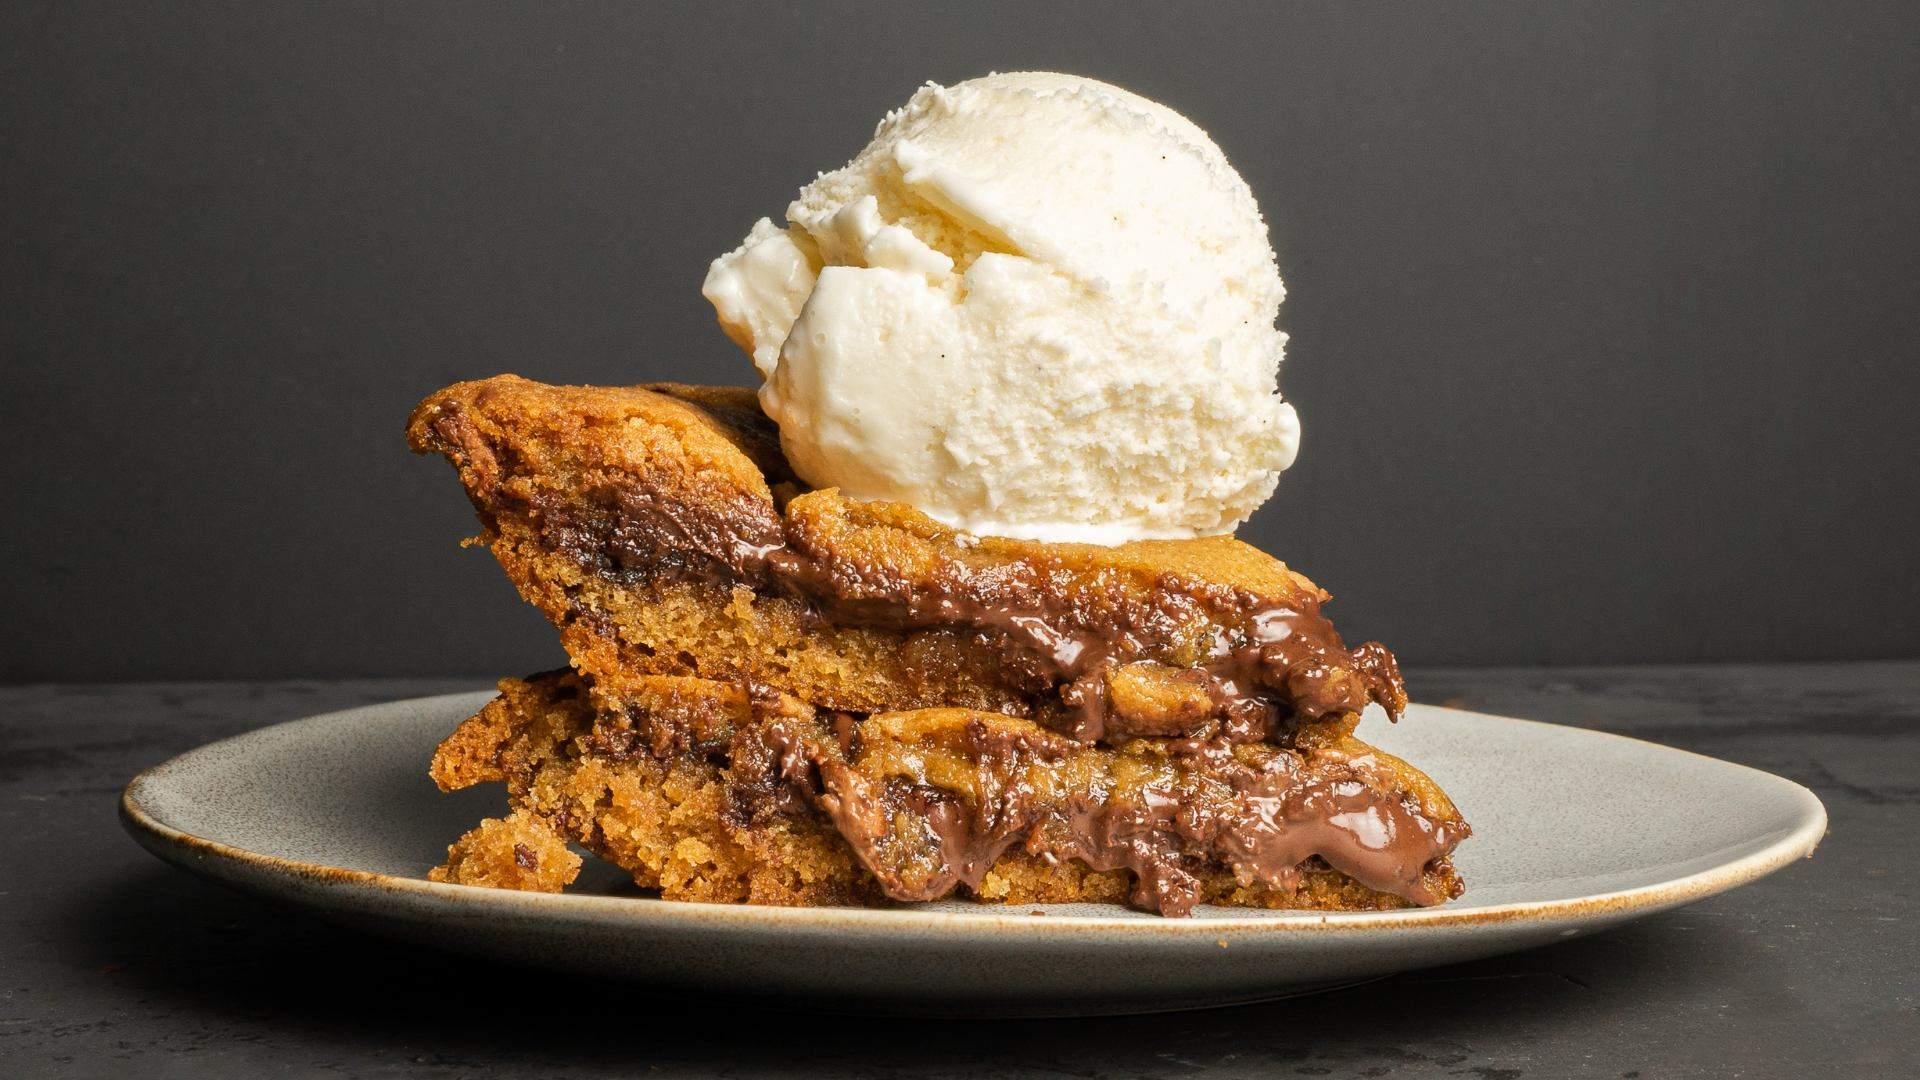 Gelato Messina Is Bringing Back Its Bake-At-Home Choc-Hazelnut Cookie Pie Just for Sydneysiders